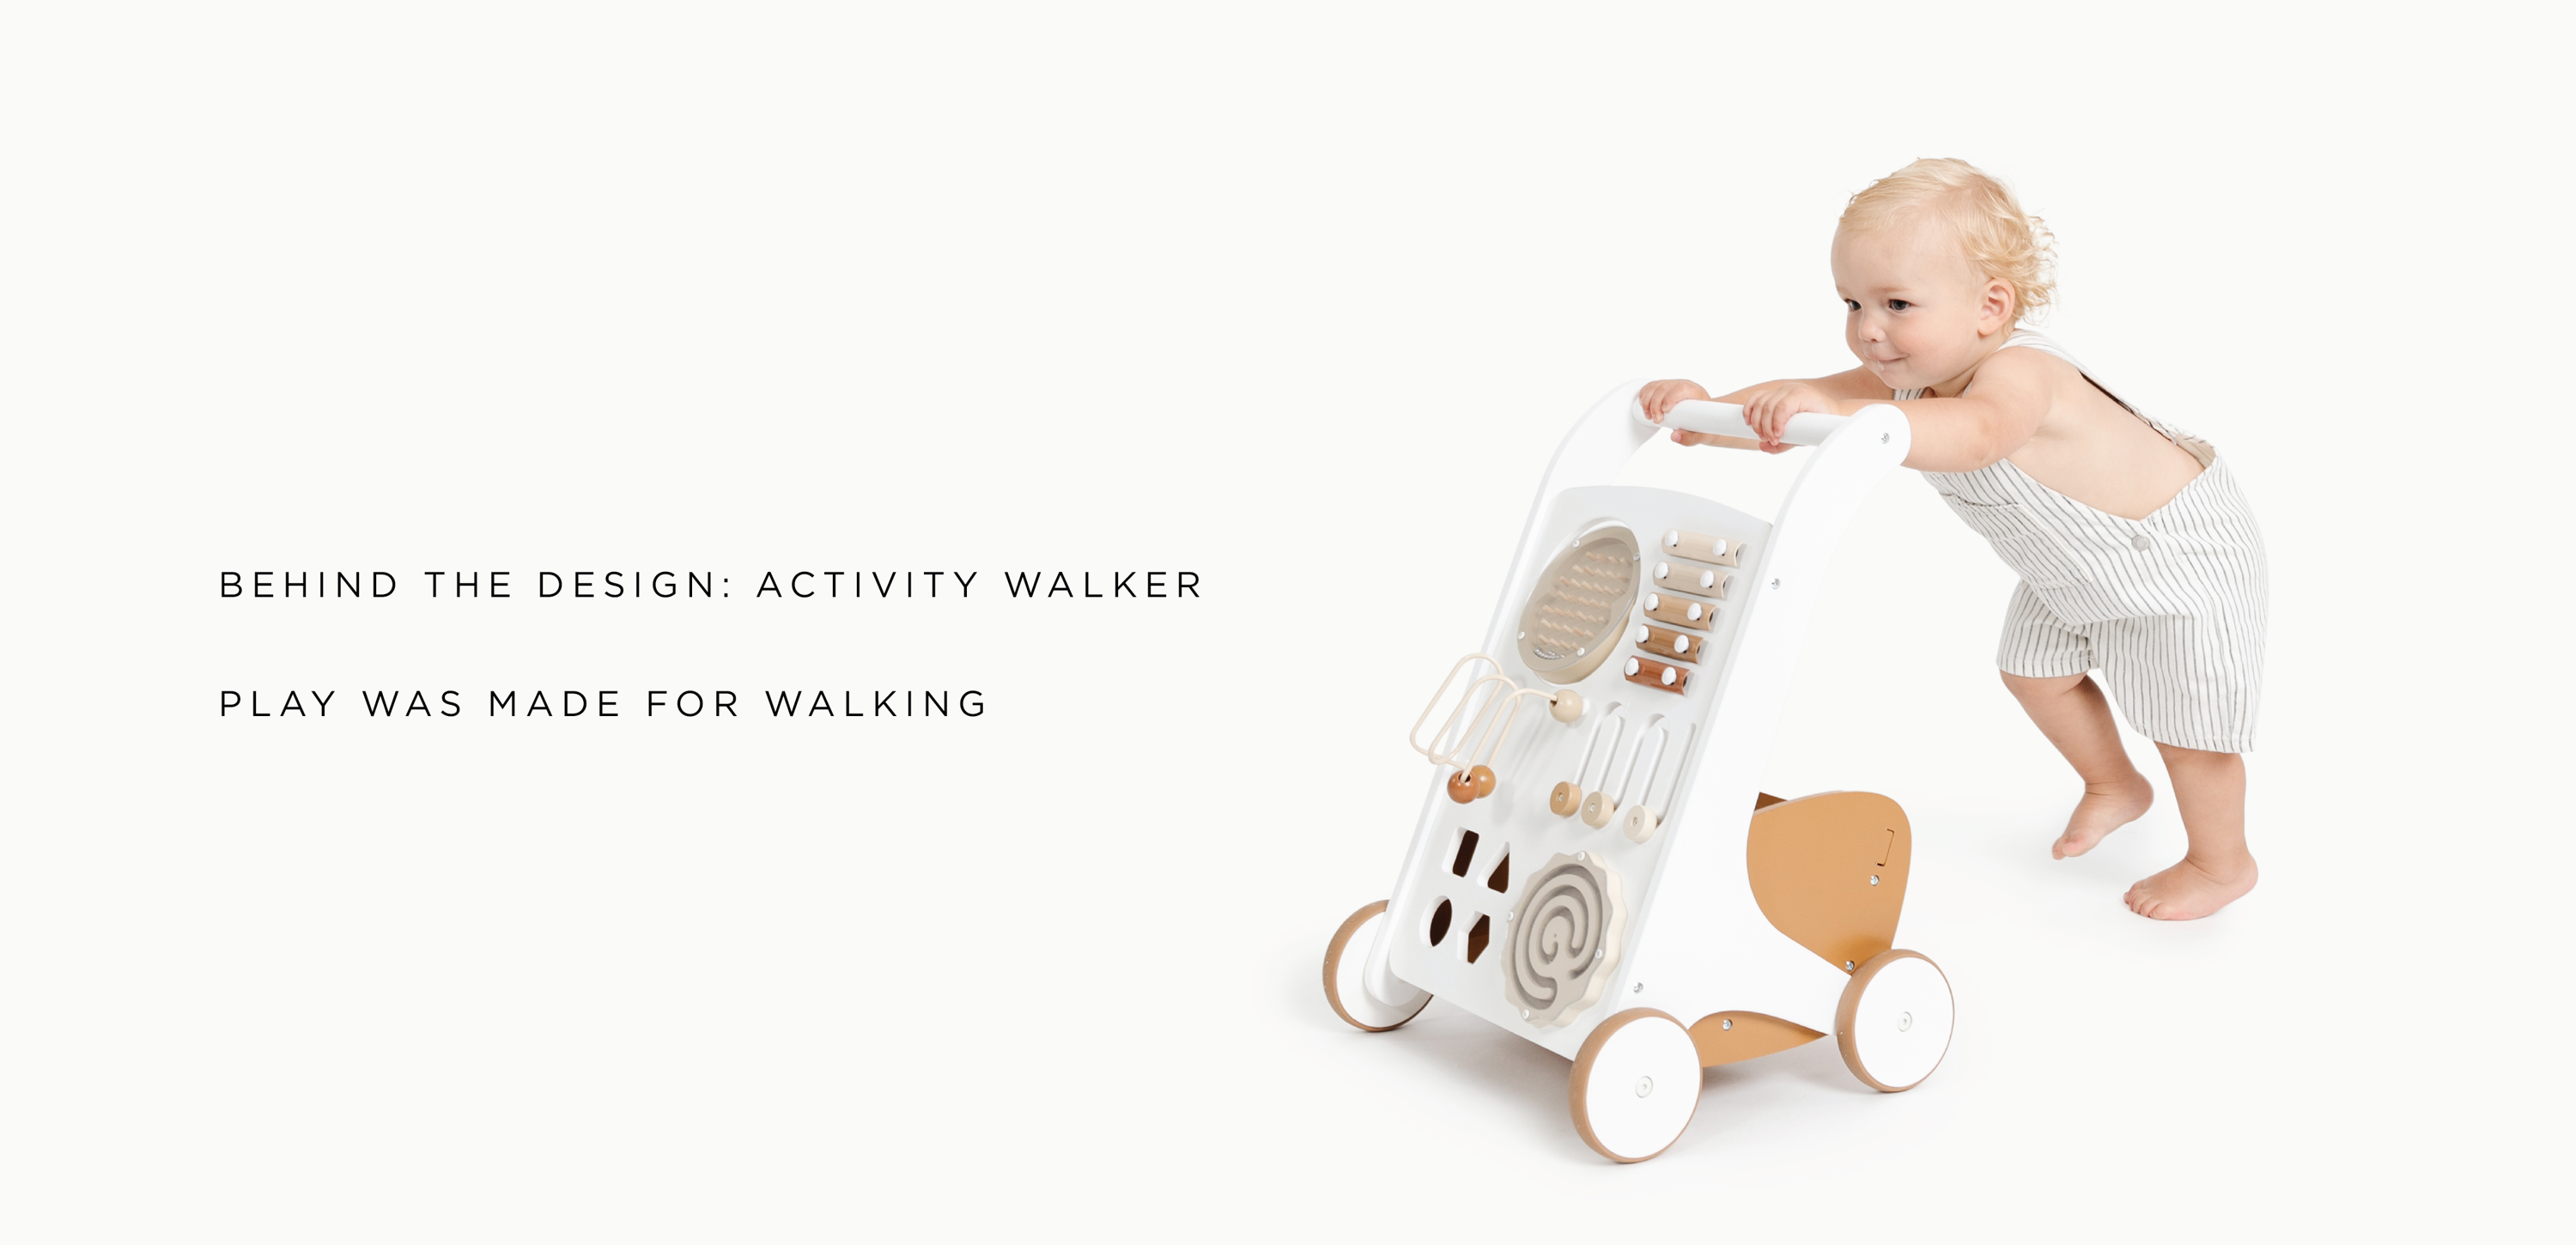 Behind the design: activity walker. Play was made for walking. Toddler pushing Gathre Activity Walker. 